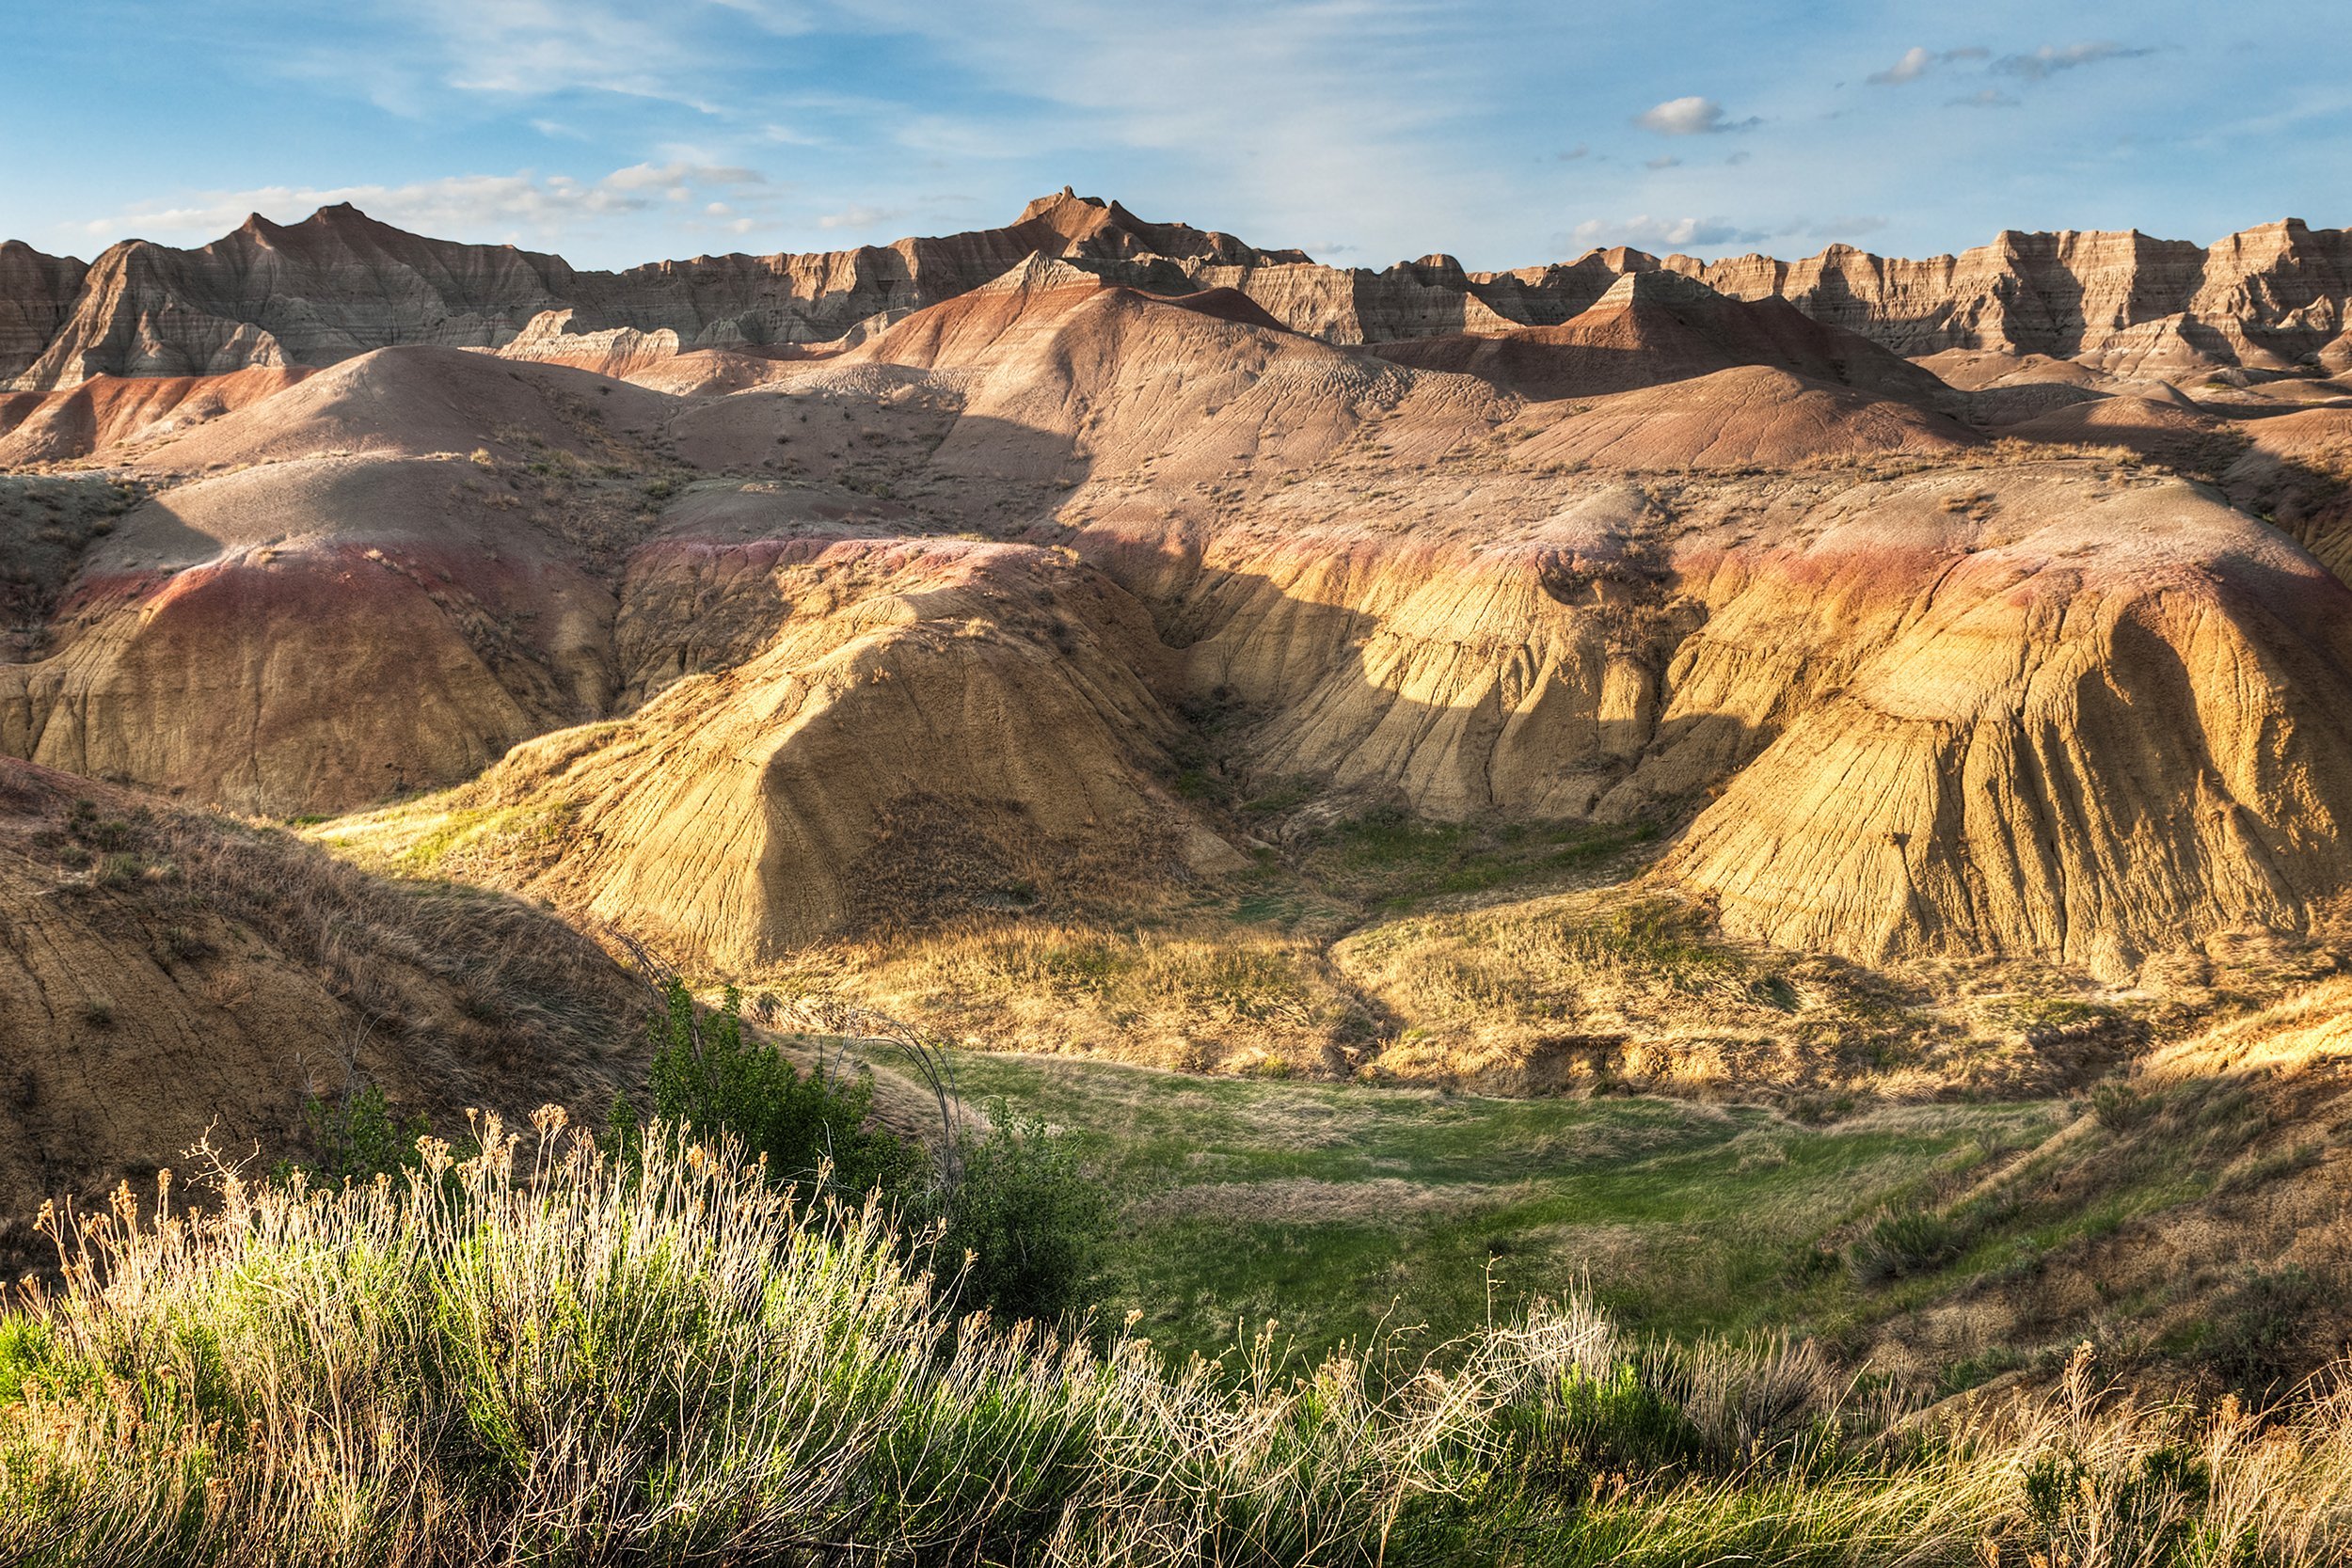 <p>Visitors to this desolate area in southwestern South Dakota won't soon forget the unique landscapes of <a href="https://www.nps.gov/badl/index.htm">Badlands National Park</a>. The park hosts two established campgrounds and several short boardwalks to scenic viewpoints. Visitors can take the kid-friendly Fossil Exhibit Trail or hike longer, more strenuous trails. </p><p><b>Related:</b> <a href="https://blog.cheapism.com/scenic-rv-stops/">Scenic Spots to Park Across America in an RV</a></p>